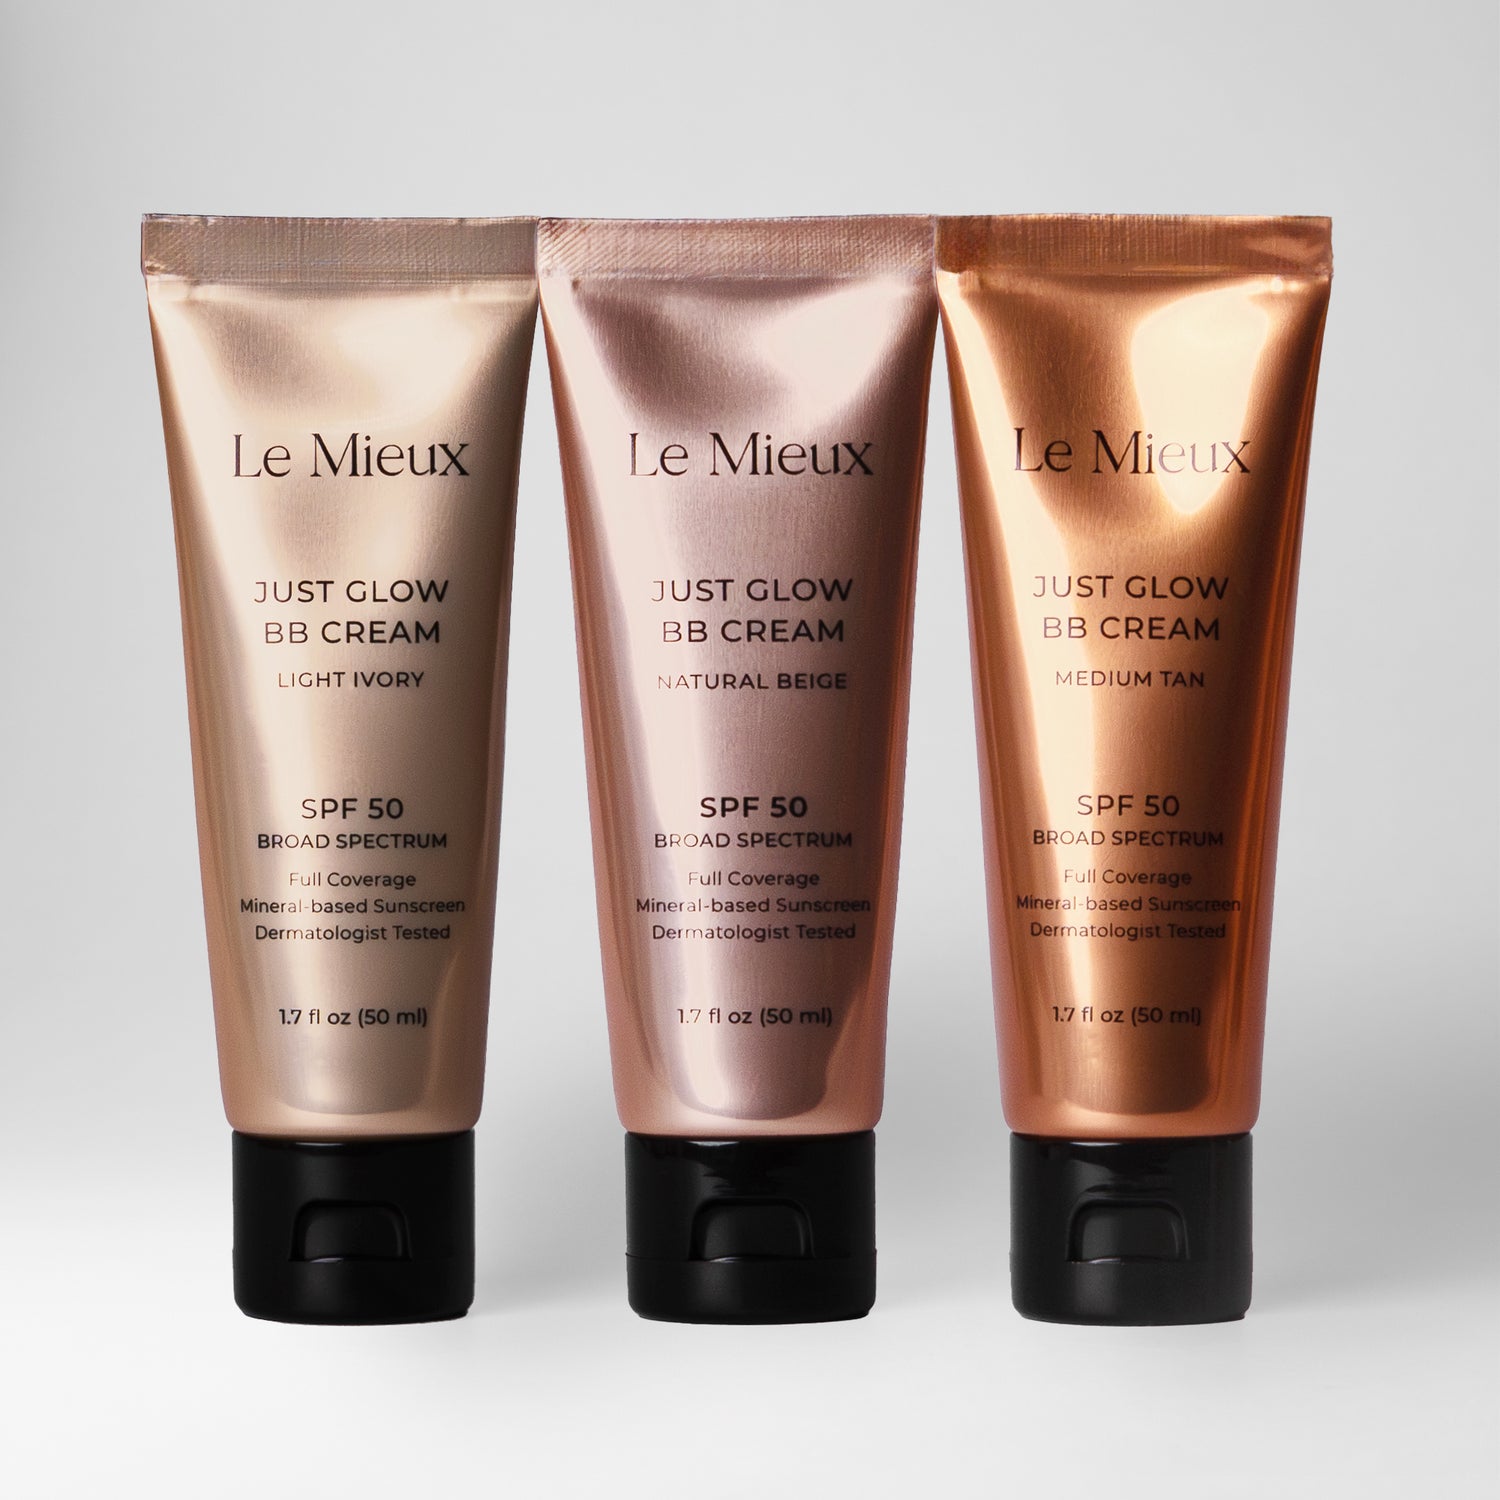  Just Glow BB Cream from Le Mieux Skincare - featured